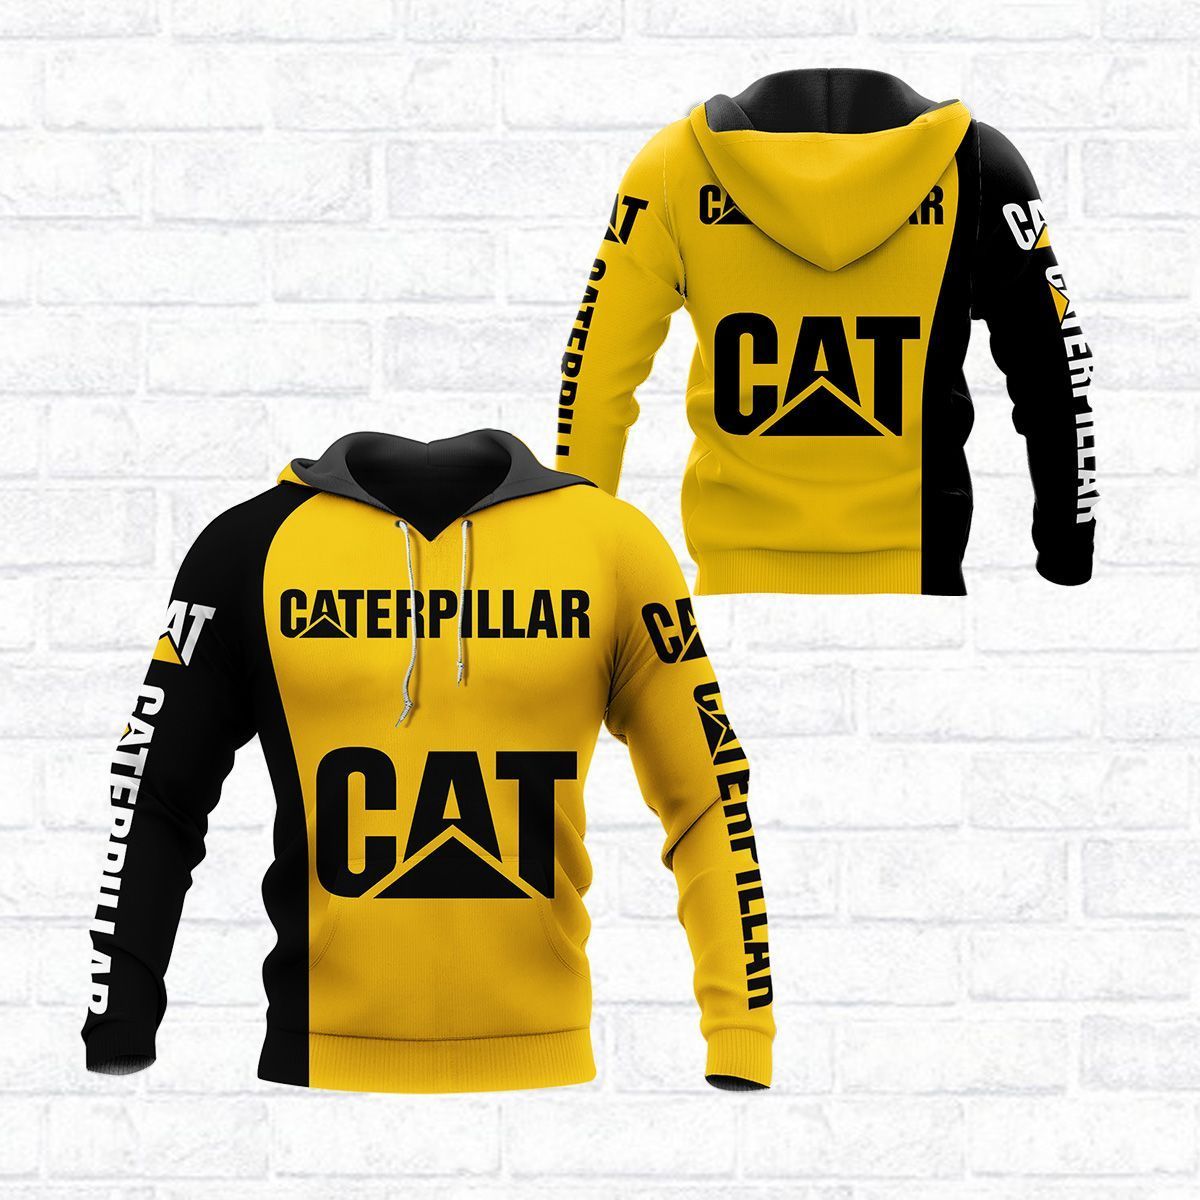 3D All Over Printed Caterpillar Shirts Ver1 (Yellow) – Zeleton Store